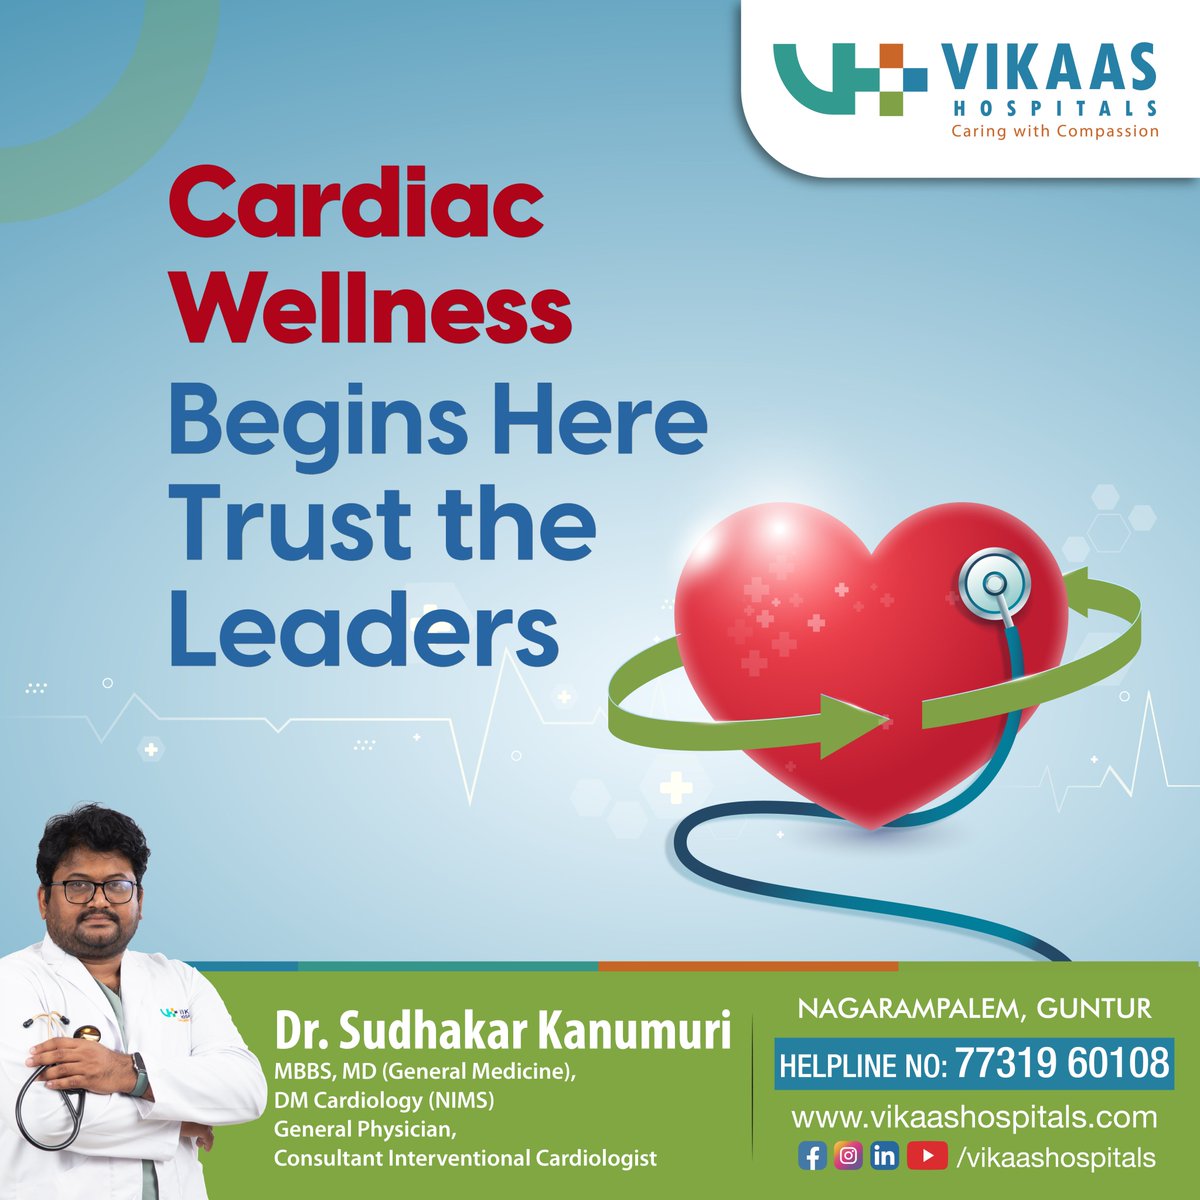 Experience premier cardiac care at Vikaas. At our world-class Cardiology Wing, we champion cardiac wellness with unrivalled expertise.

#vikaashospital #VikaasCardiacExcellence #doctor #HeartCareBeyondCompare #LeadingCardioCare #ExpertHeartIntervention #heartsurgery